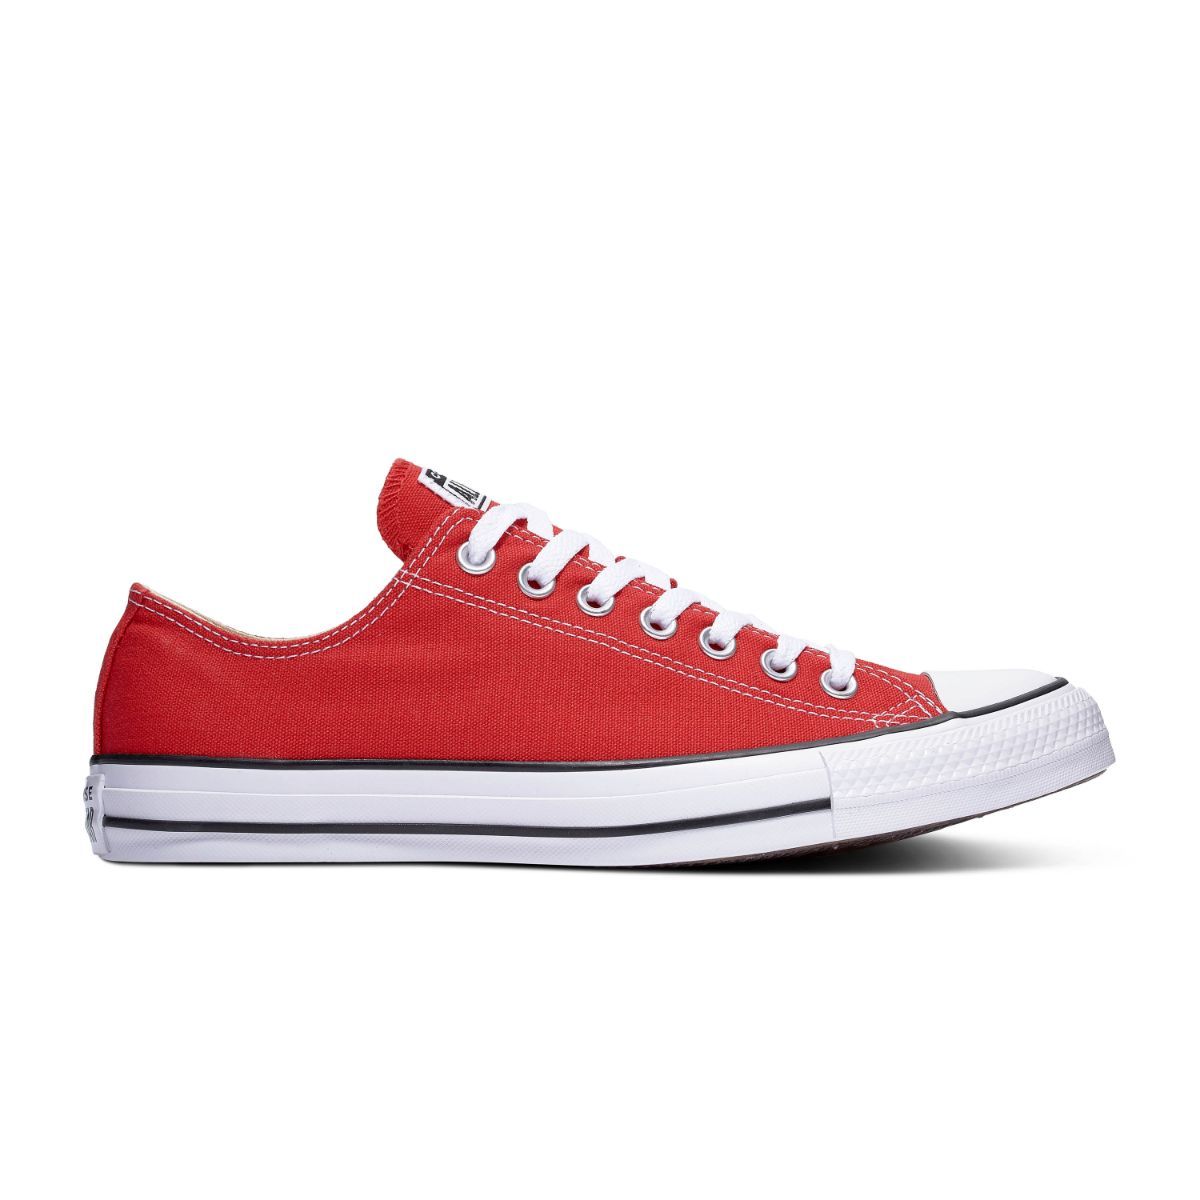 Chuck Taylor All Star Red Low Top